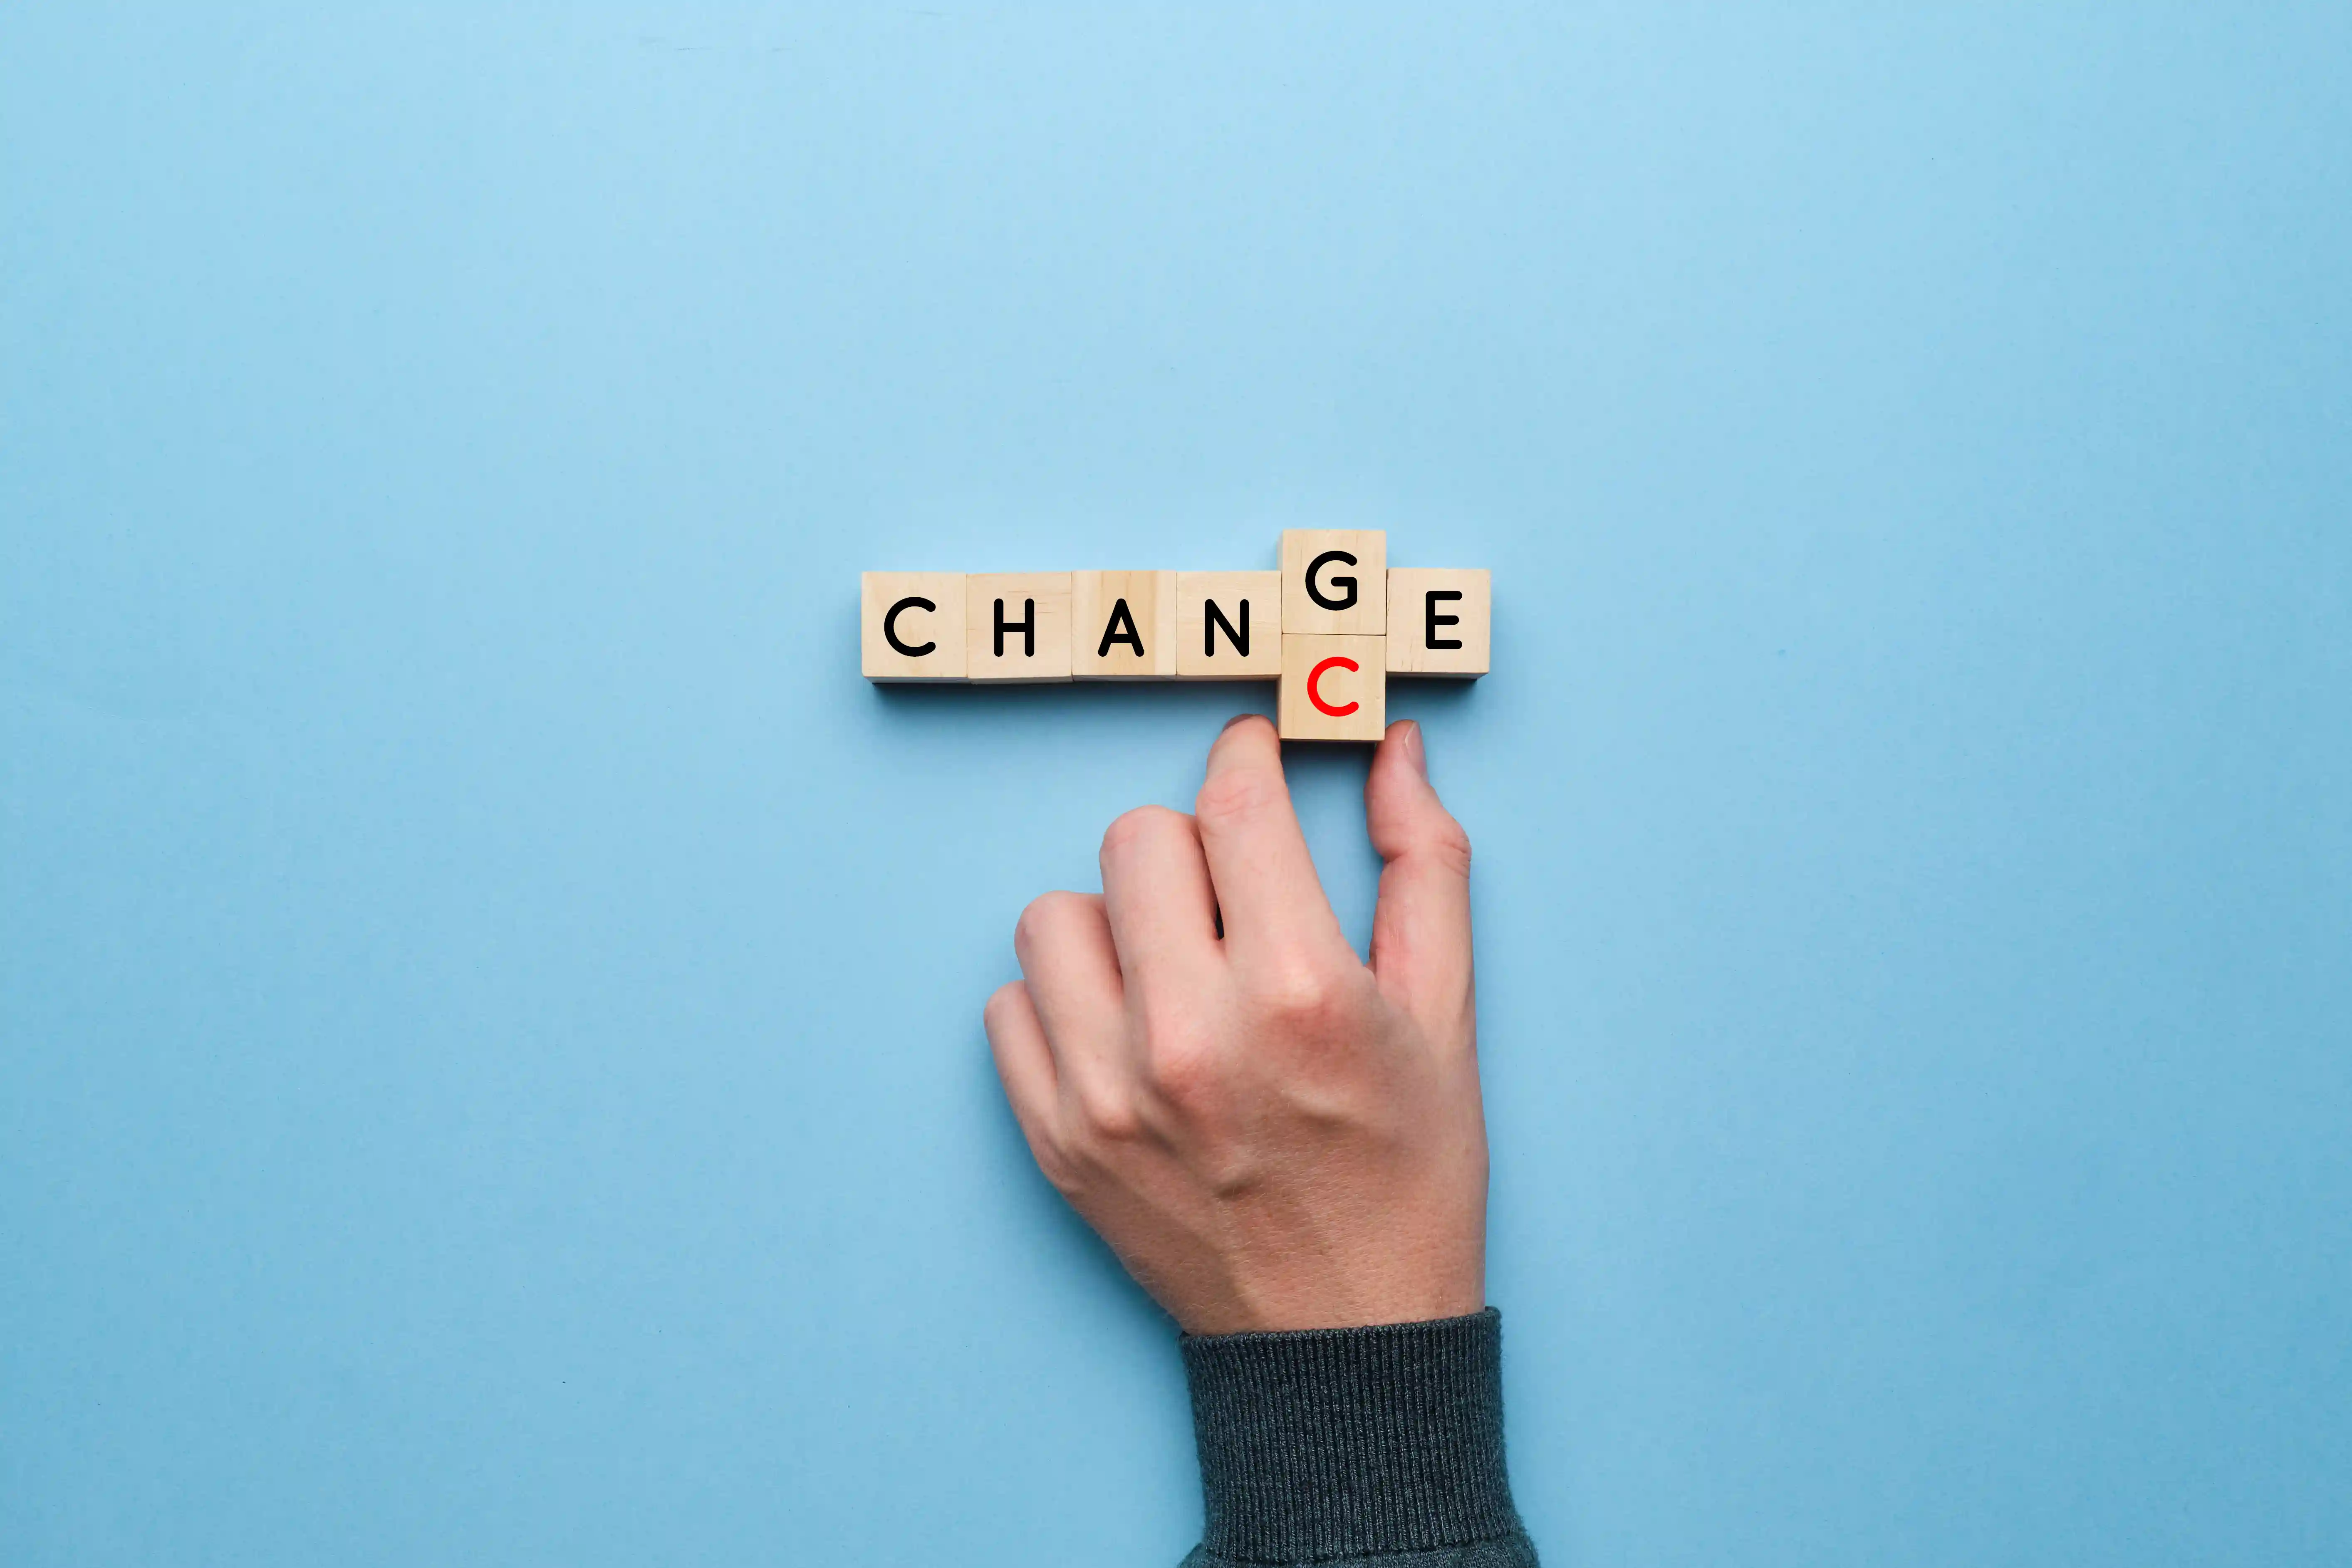  8 Tips for Adapting to Change